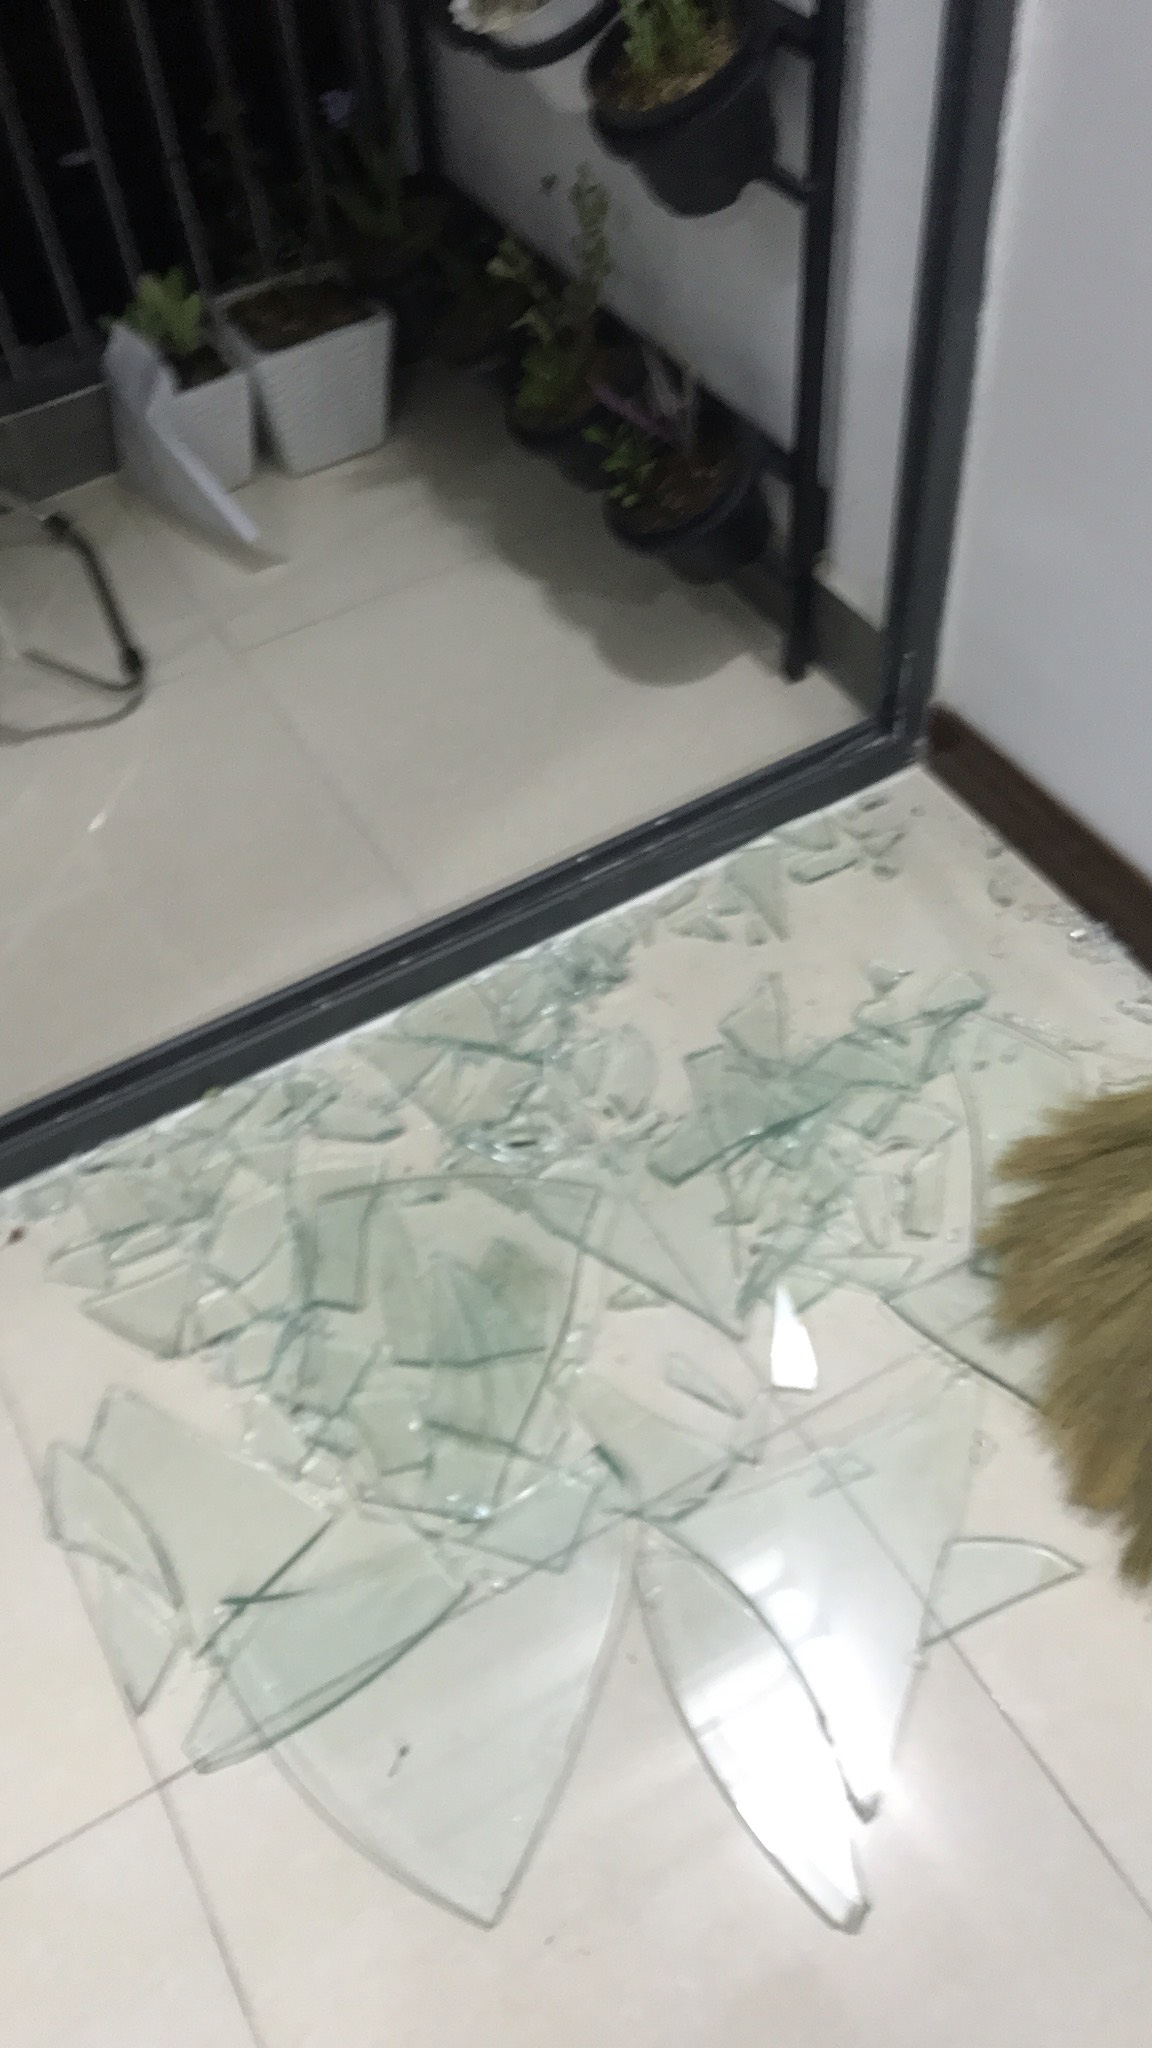 This supplied photo shows glass on a sliding door broken into pieces at the P.H Nha Trang apartment complex in Nha Trang City, Khanh Hoa Province, Vietnam.